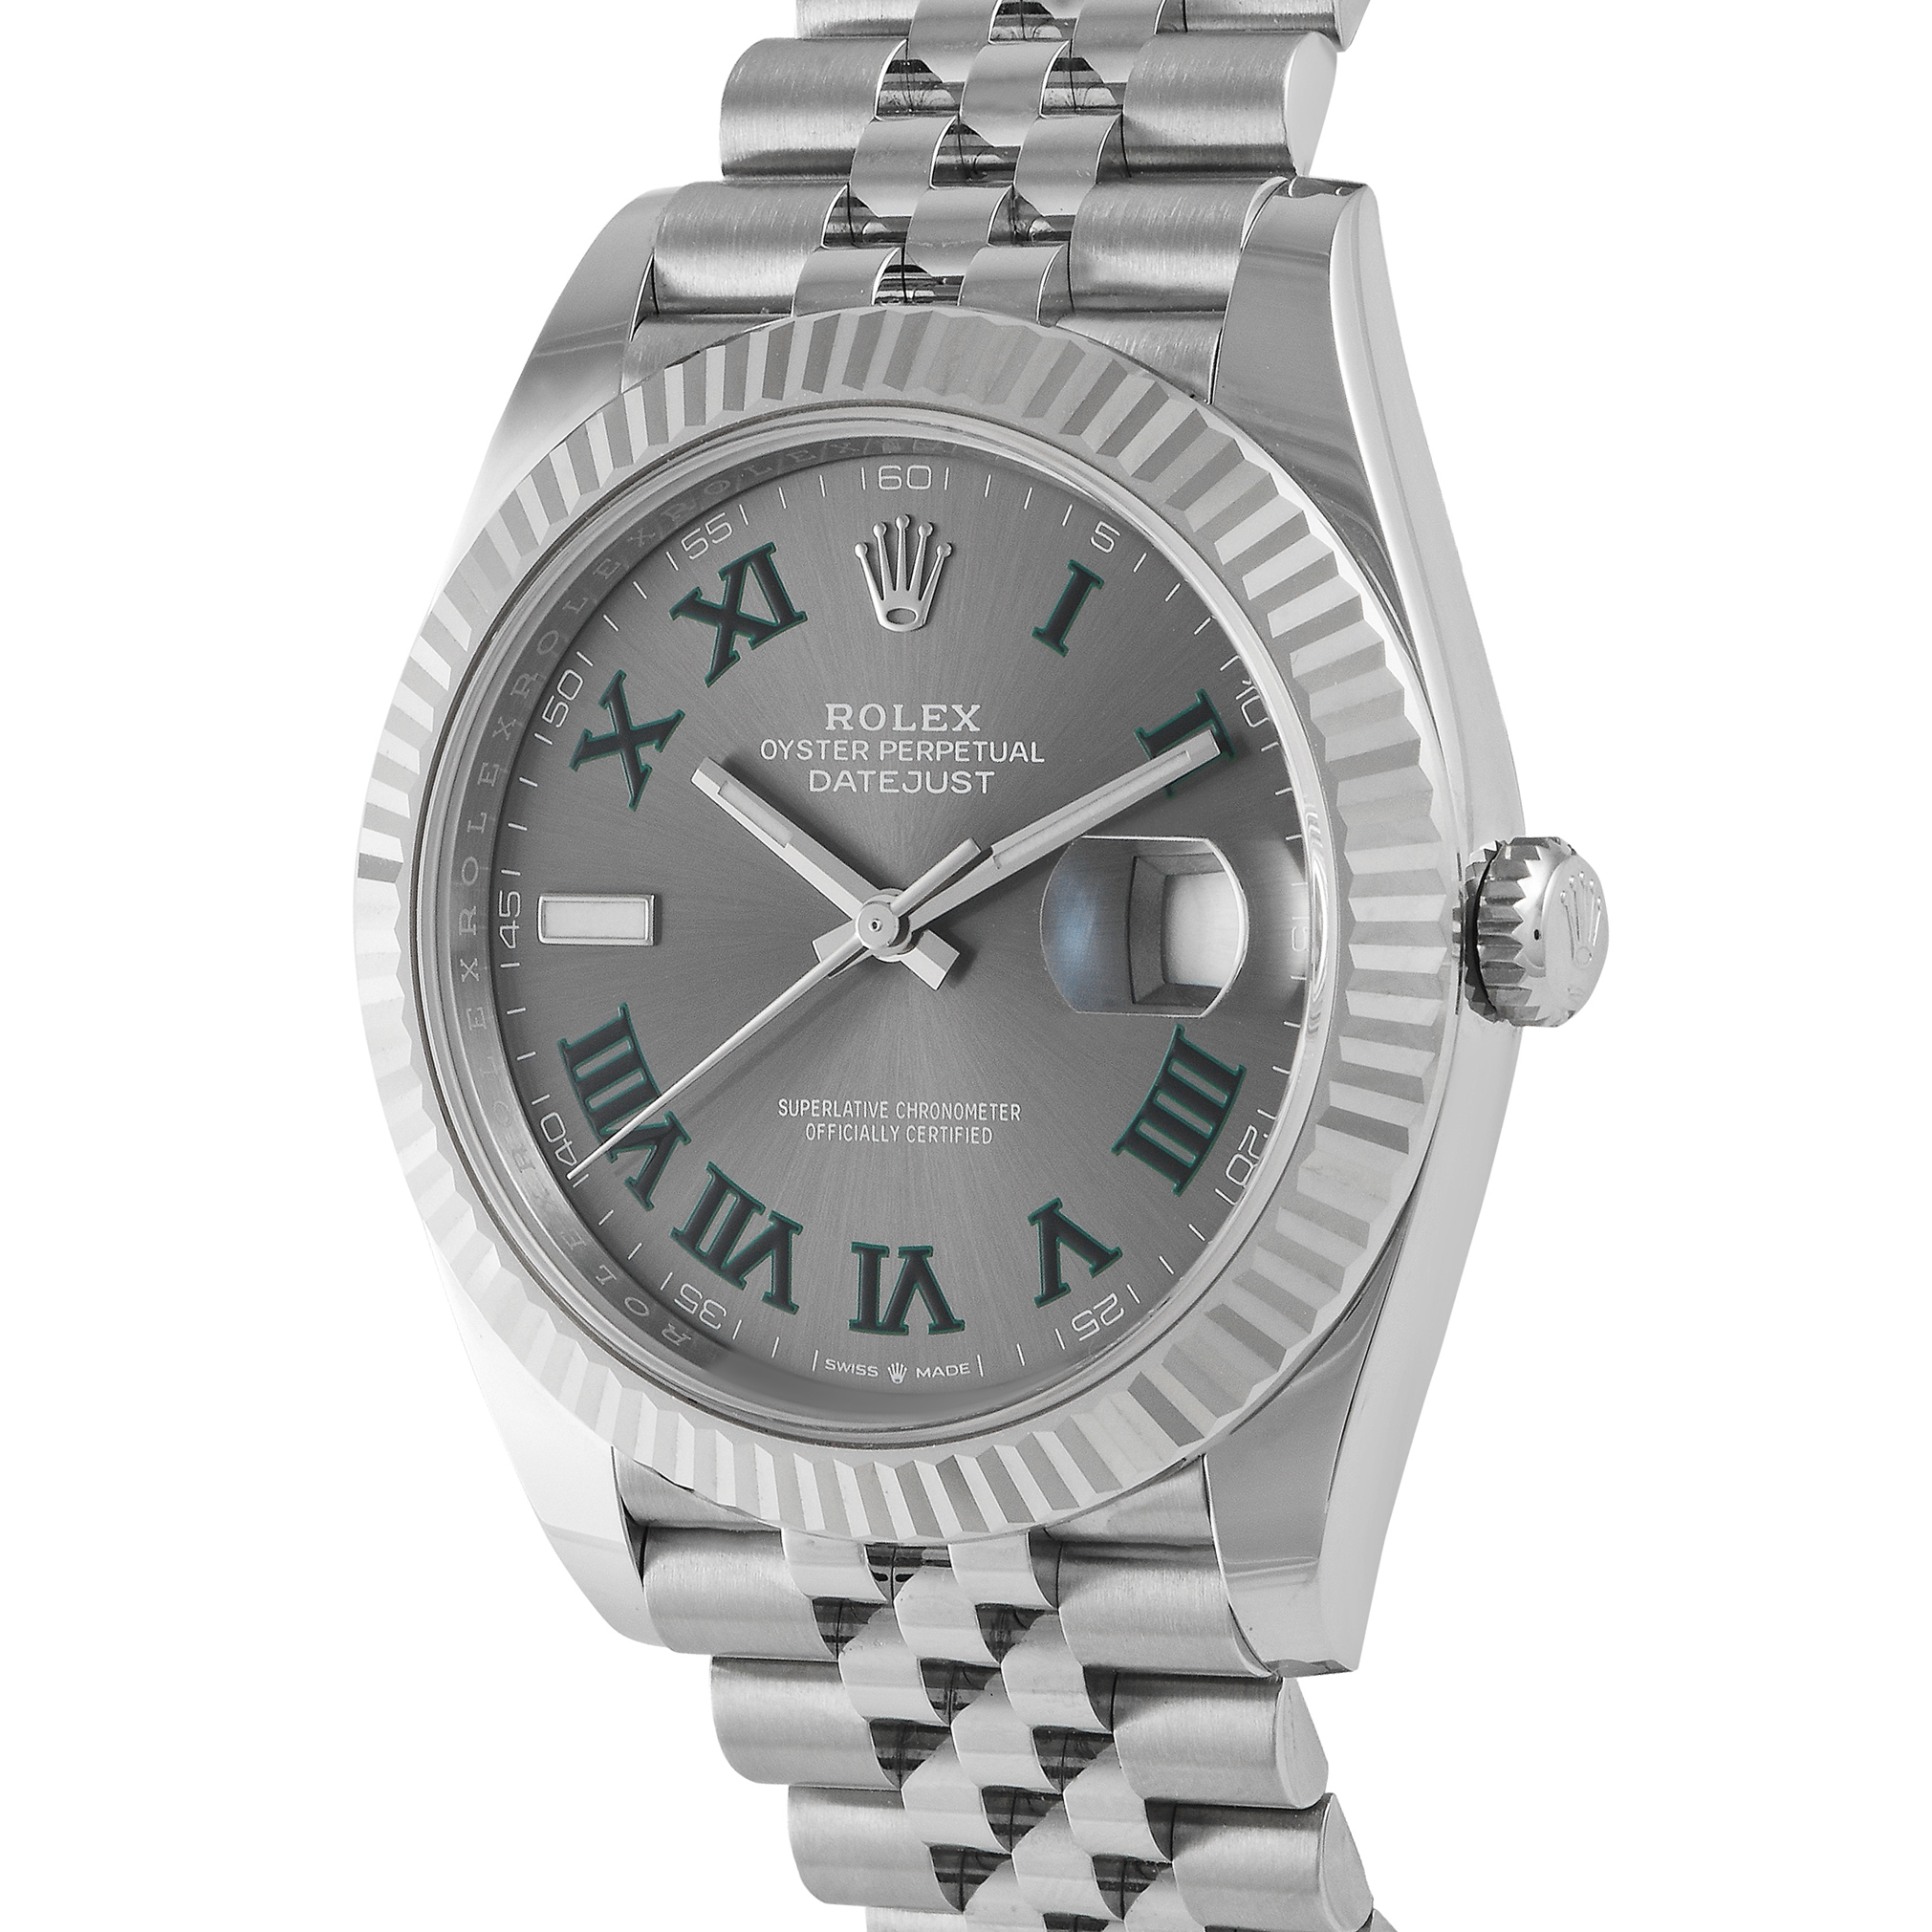 Are Rolex watches the best and why? - Quora